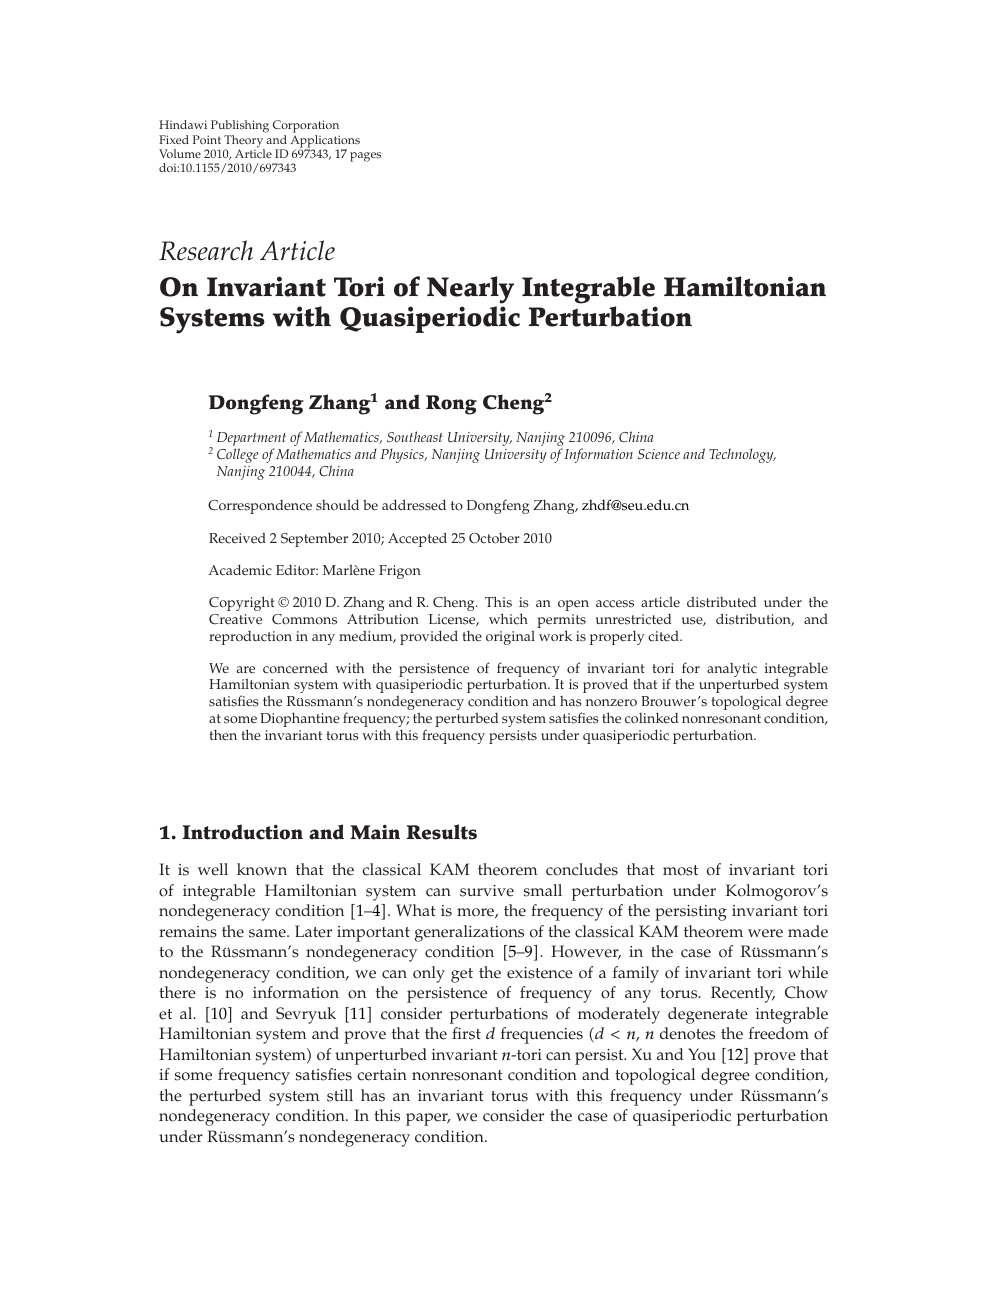 On Invariant Tori Of Nearly Integrable Hamiltonian Systems With Quasiperiodic Perturbation Topic Of Research Paper In Mathematics Download Scholarly Article Pdf And Read For Free On Cyberleninka Open Science Hub